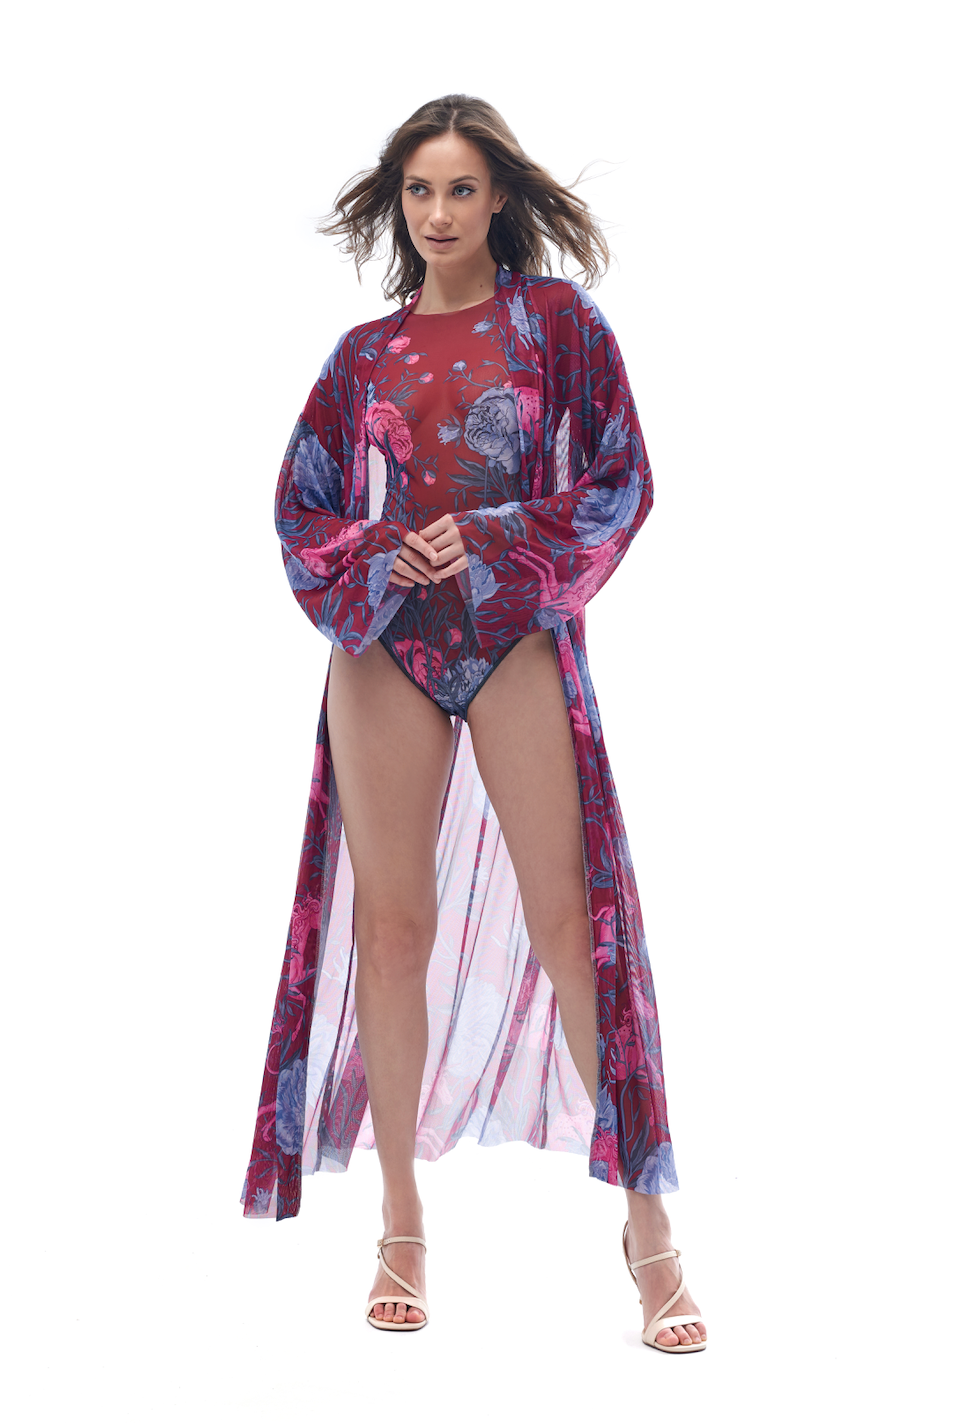  Discover sustainable tan-through smart swimsuits adorned with a stylish peonies print in this file. Included is a beach robe, offering luxurious sun protection and a perfect silhouette.